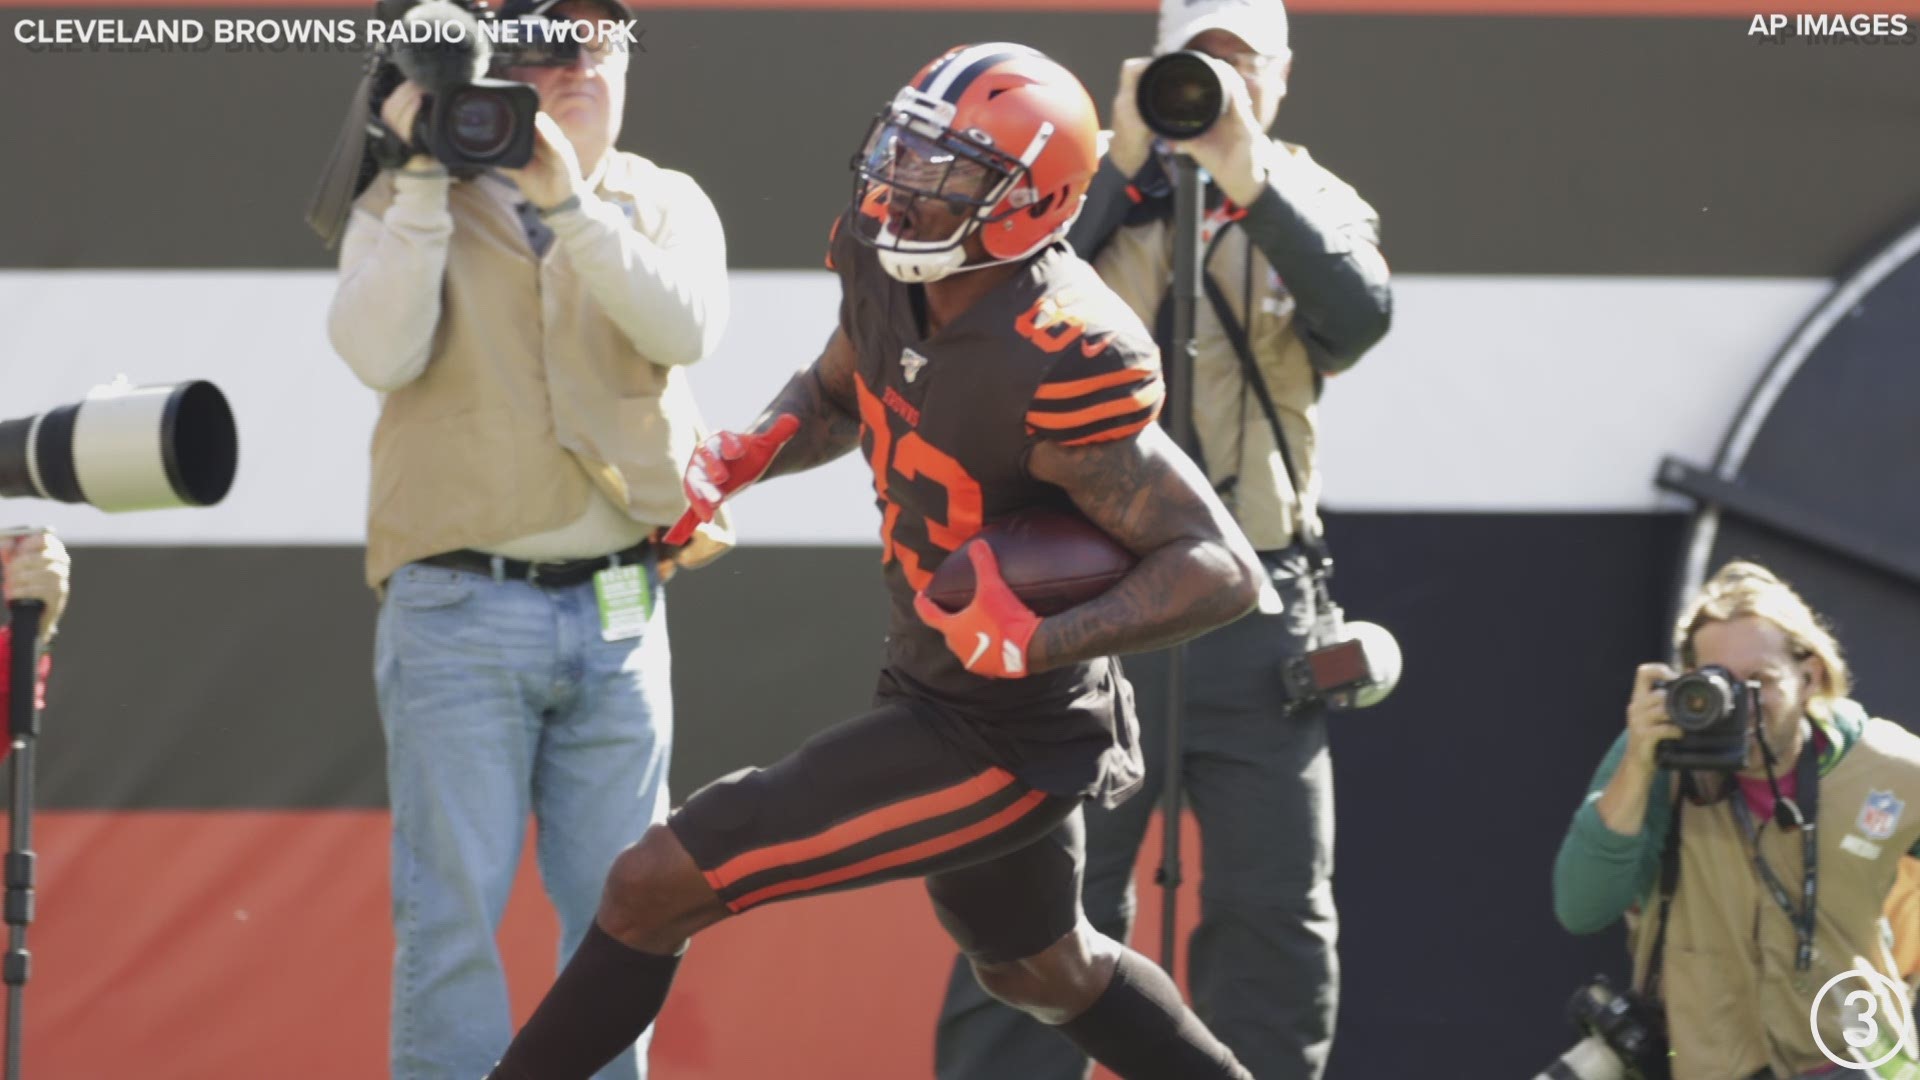 Quarterback Baker Mayfield threw a 31-yard touchdown pass to tight Ricky Seals-Jones to extend the Cleveland Browns’ lead over Seattle early in the second quarter.